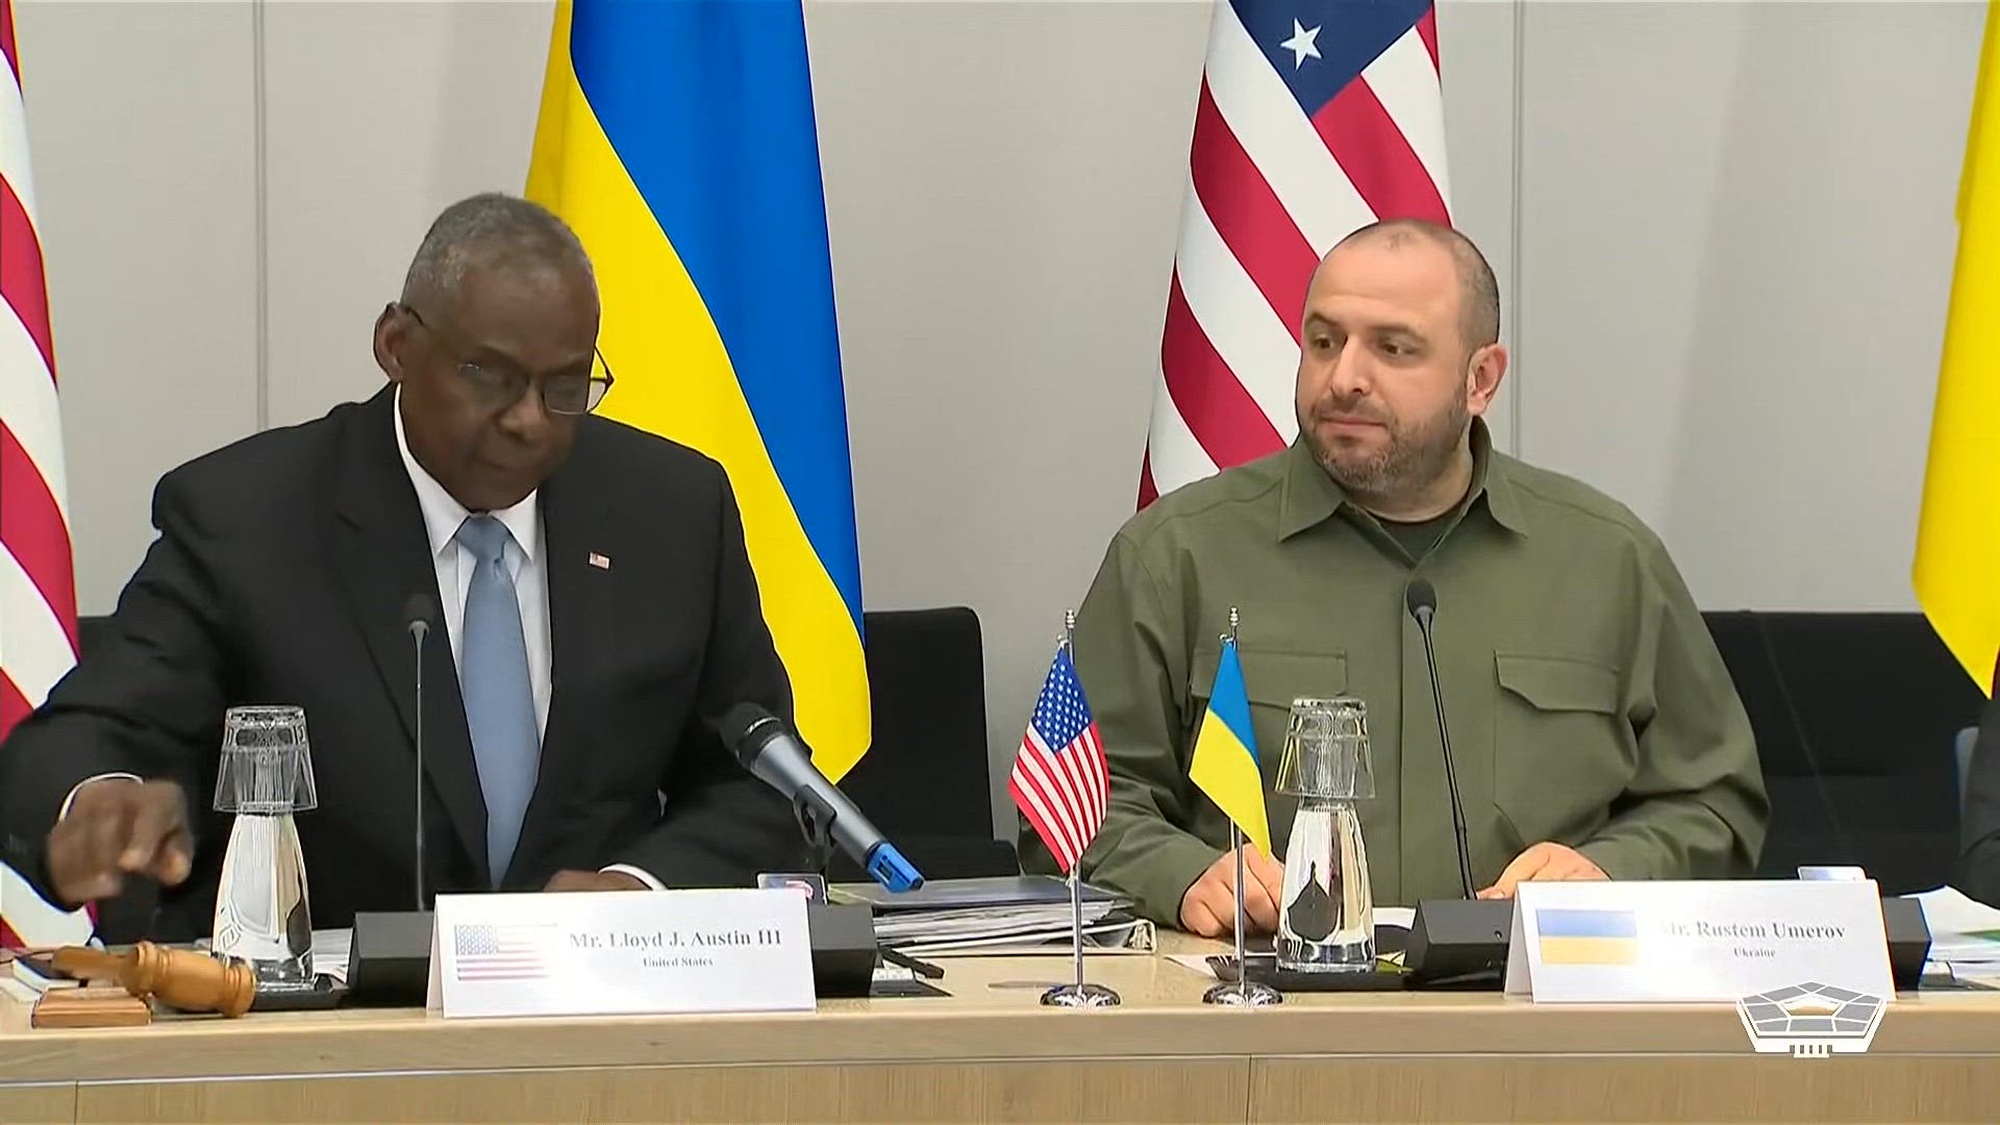 Secretary of Defense Lloyd J. Austin III delivers opening remarks at the 23rd Ukraine Defense Contact Group meeting. Ministers of defense and senior military officials from nearly 50 nations discuss the ongoing crisis in Ukraine.